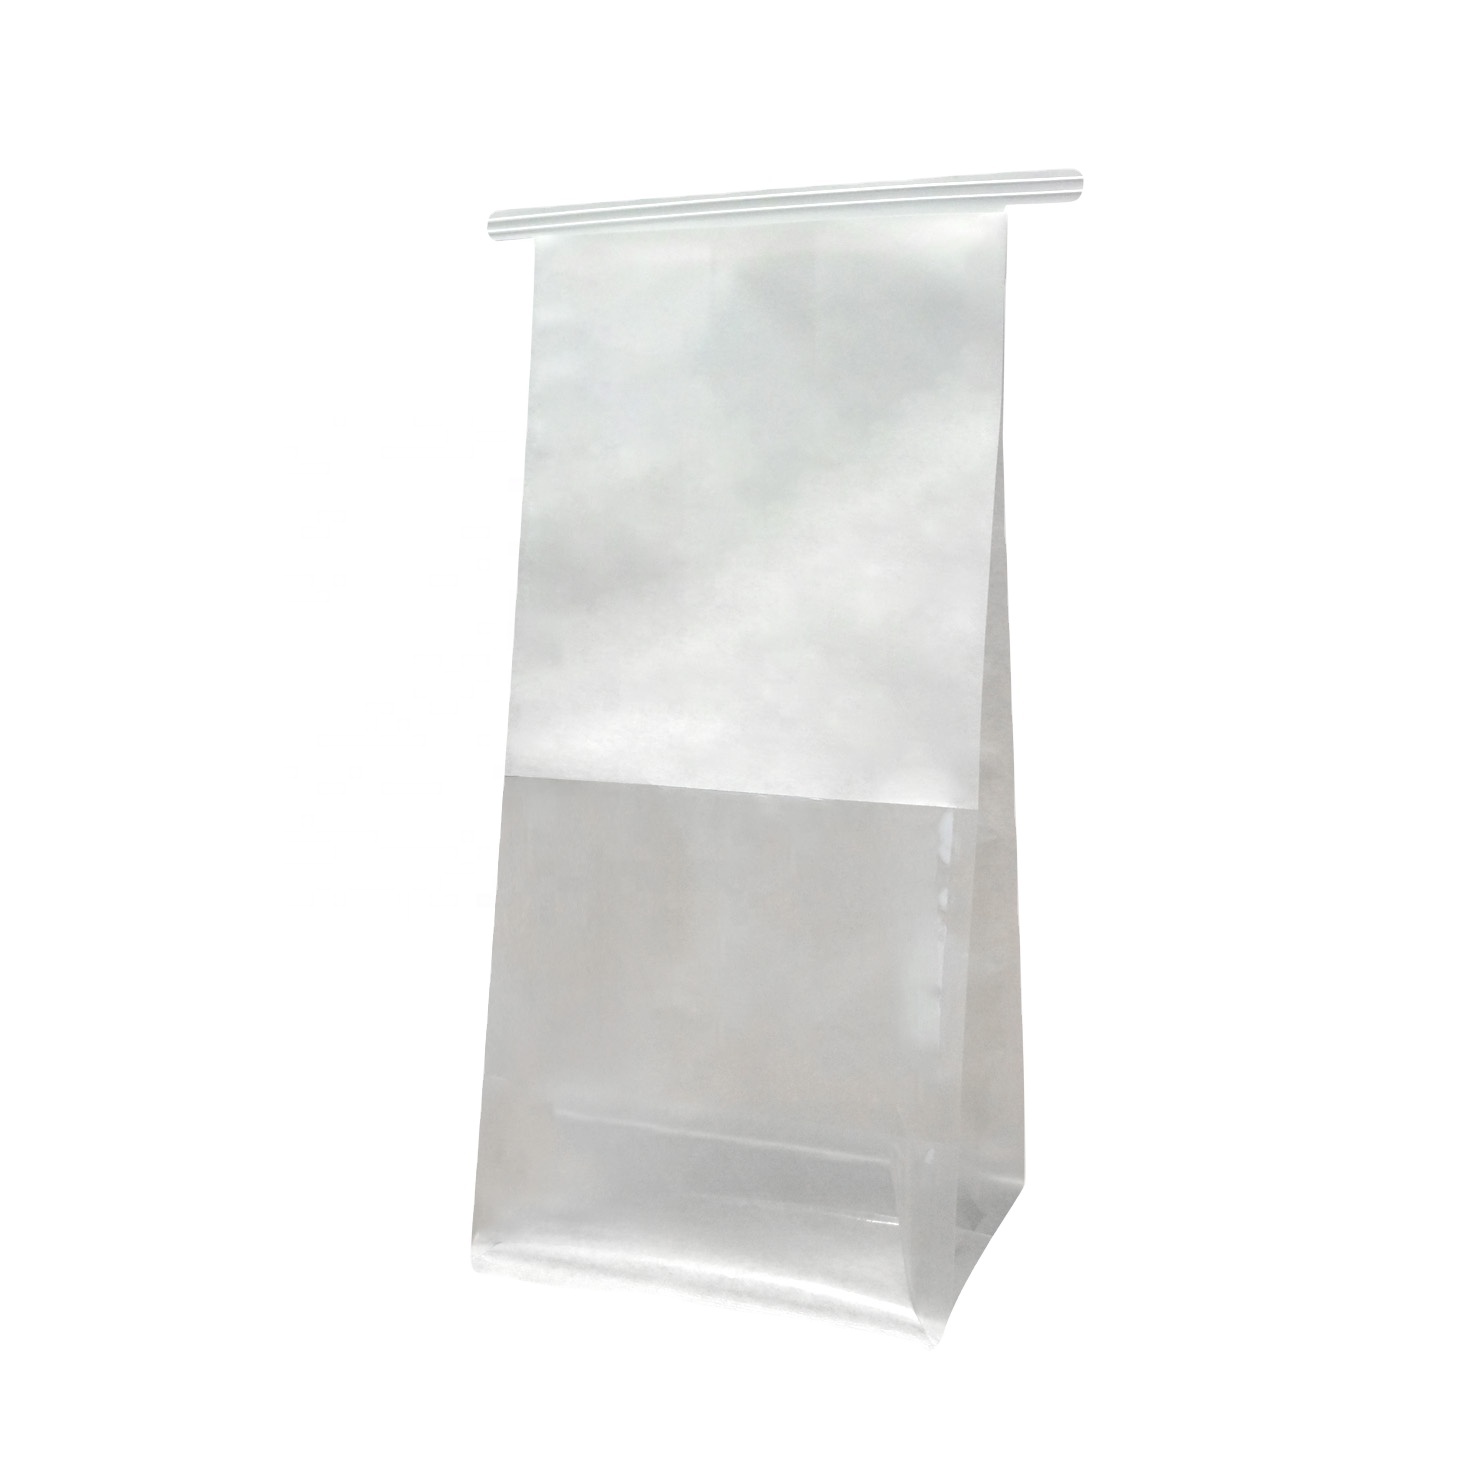 DQ PACK Packaging Stand up Pouch China Plastic Bag Factory Resealable Zipper Food Packaging Bags with Clear Window Packaging Bag